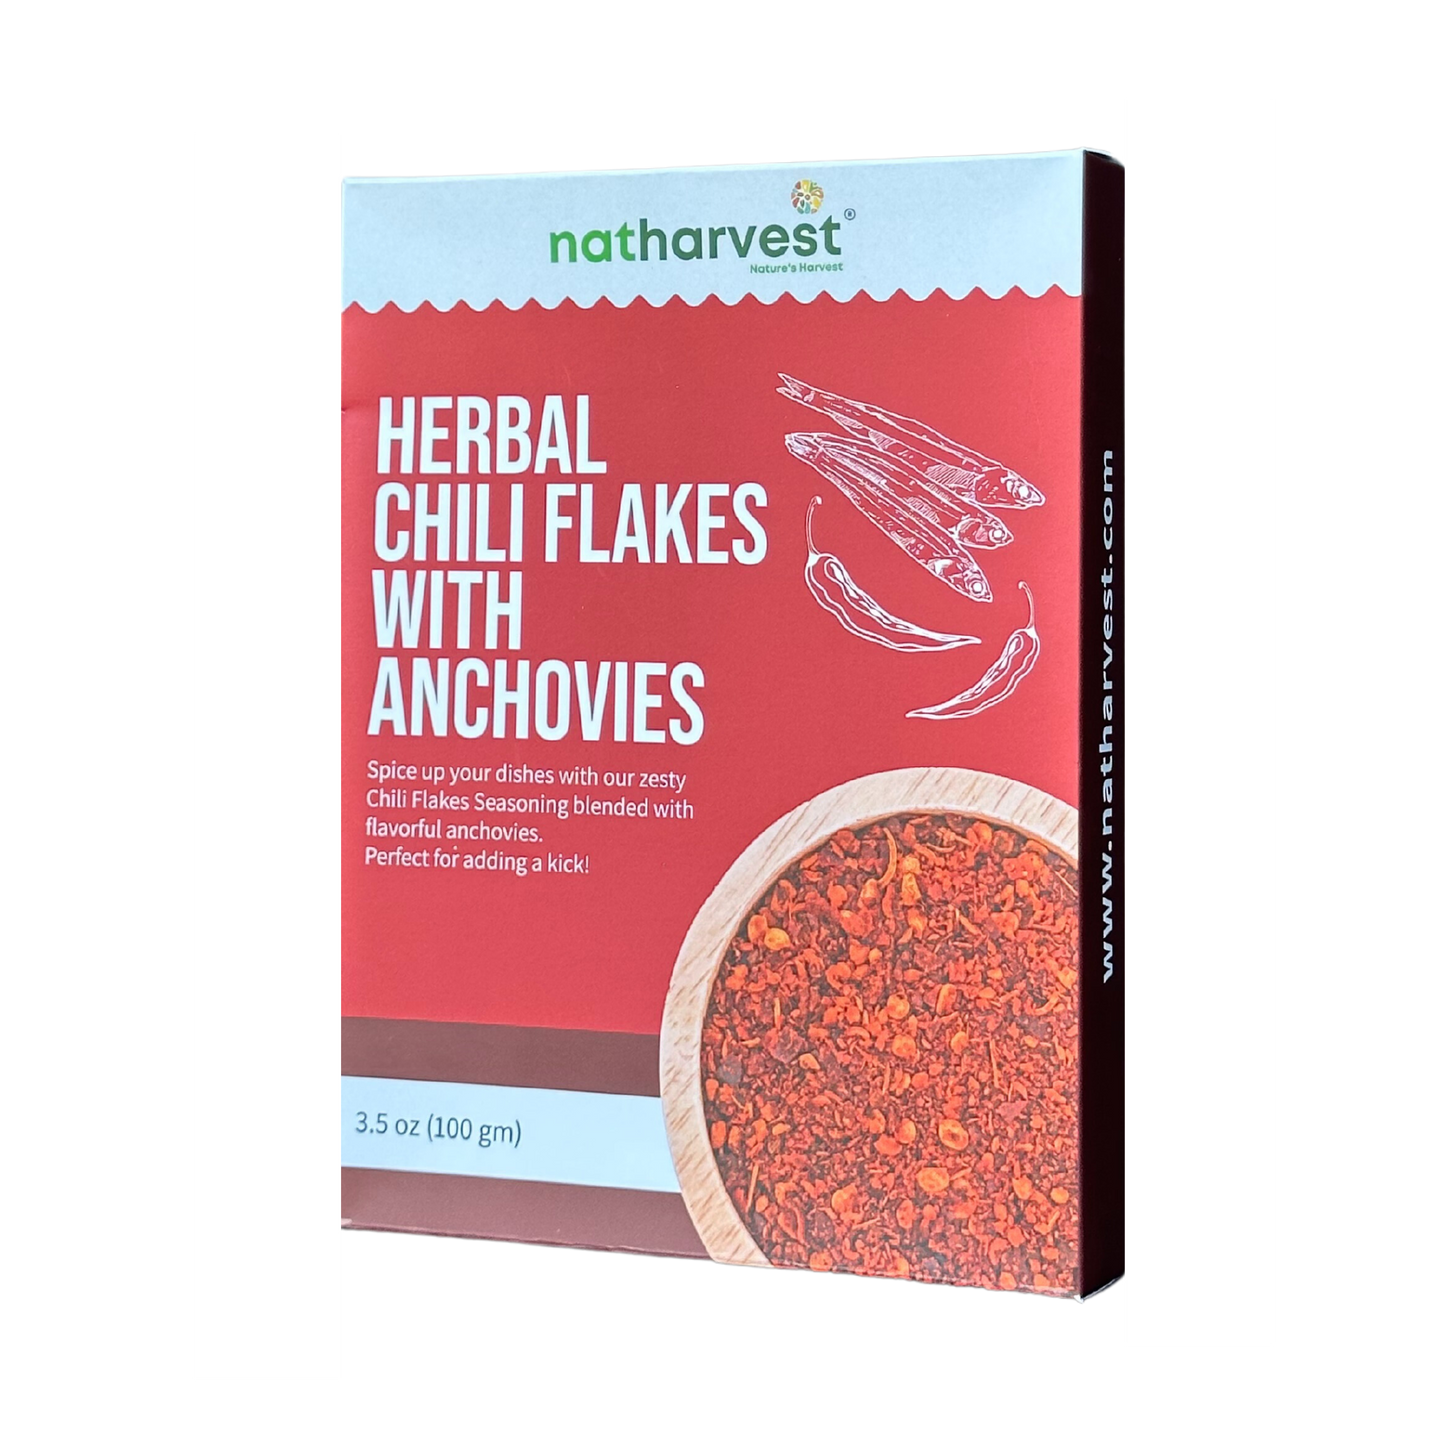 Natharvest Herbal Chili Flakes with Anchovies, medium-level spicy, 3.5 oz (100 gm)